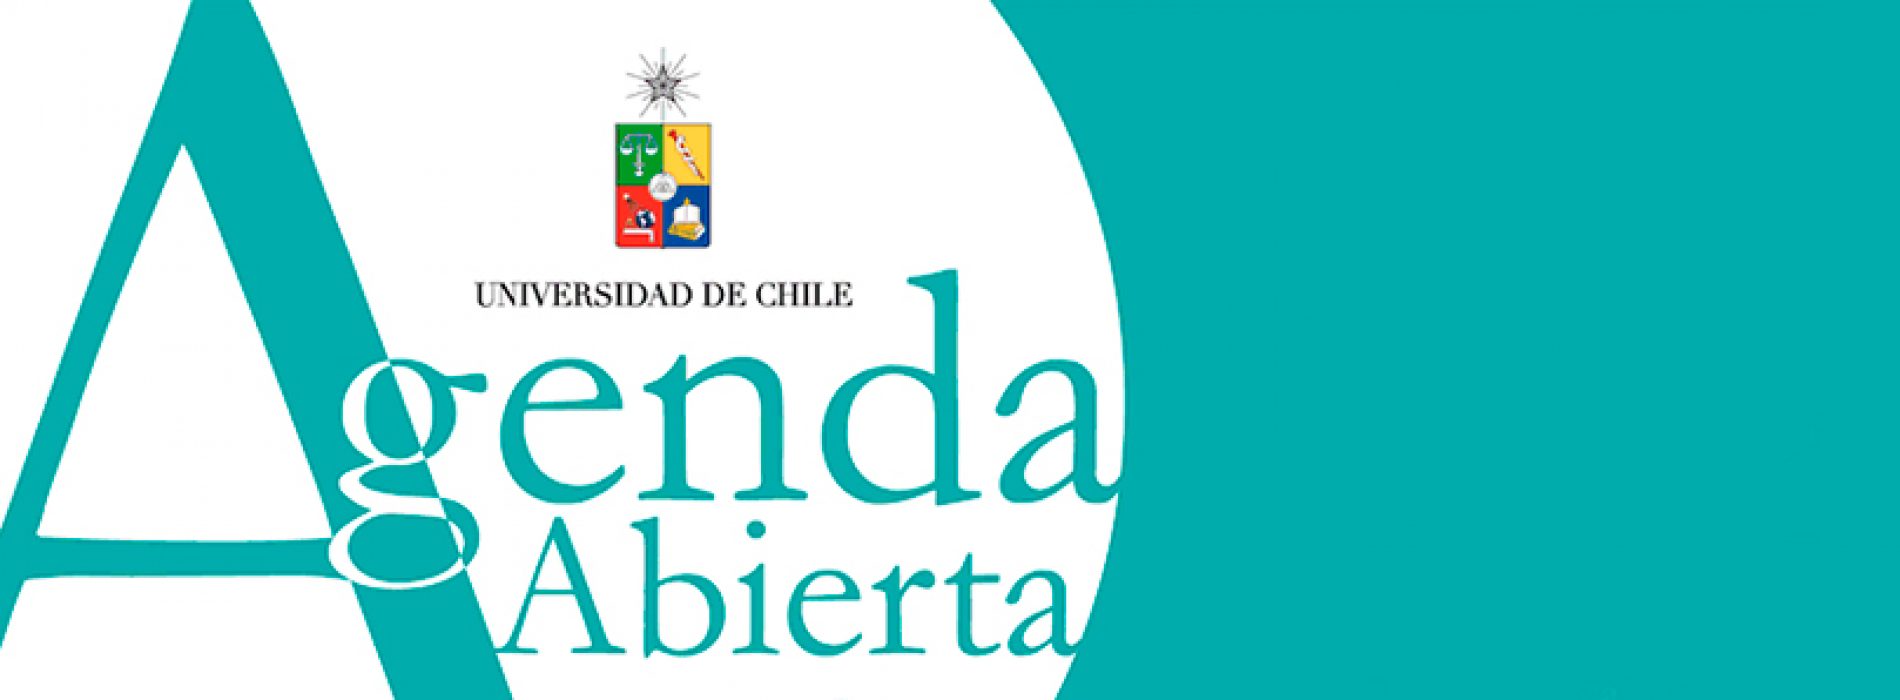 "The Chile invites". Check out their activities in August